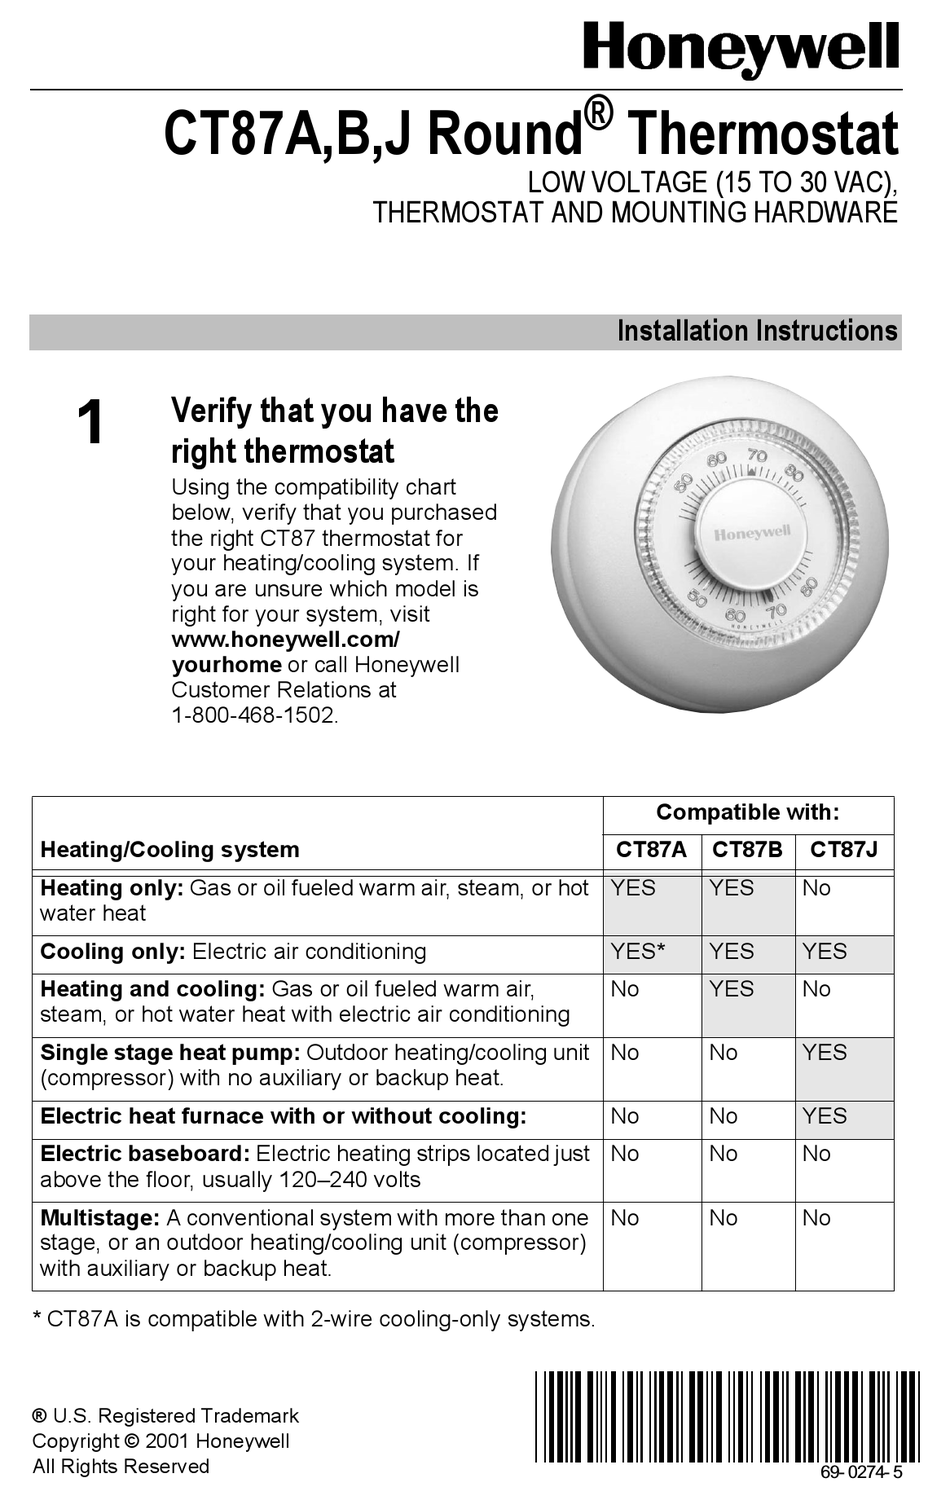 Honeywell Ct87a Round Installation, Honeywell 2 Wire Non Programmable Thermostat Wiring Diagram Pdf